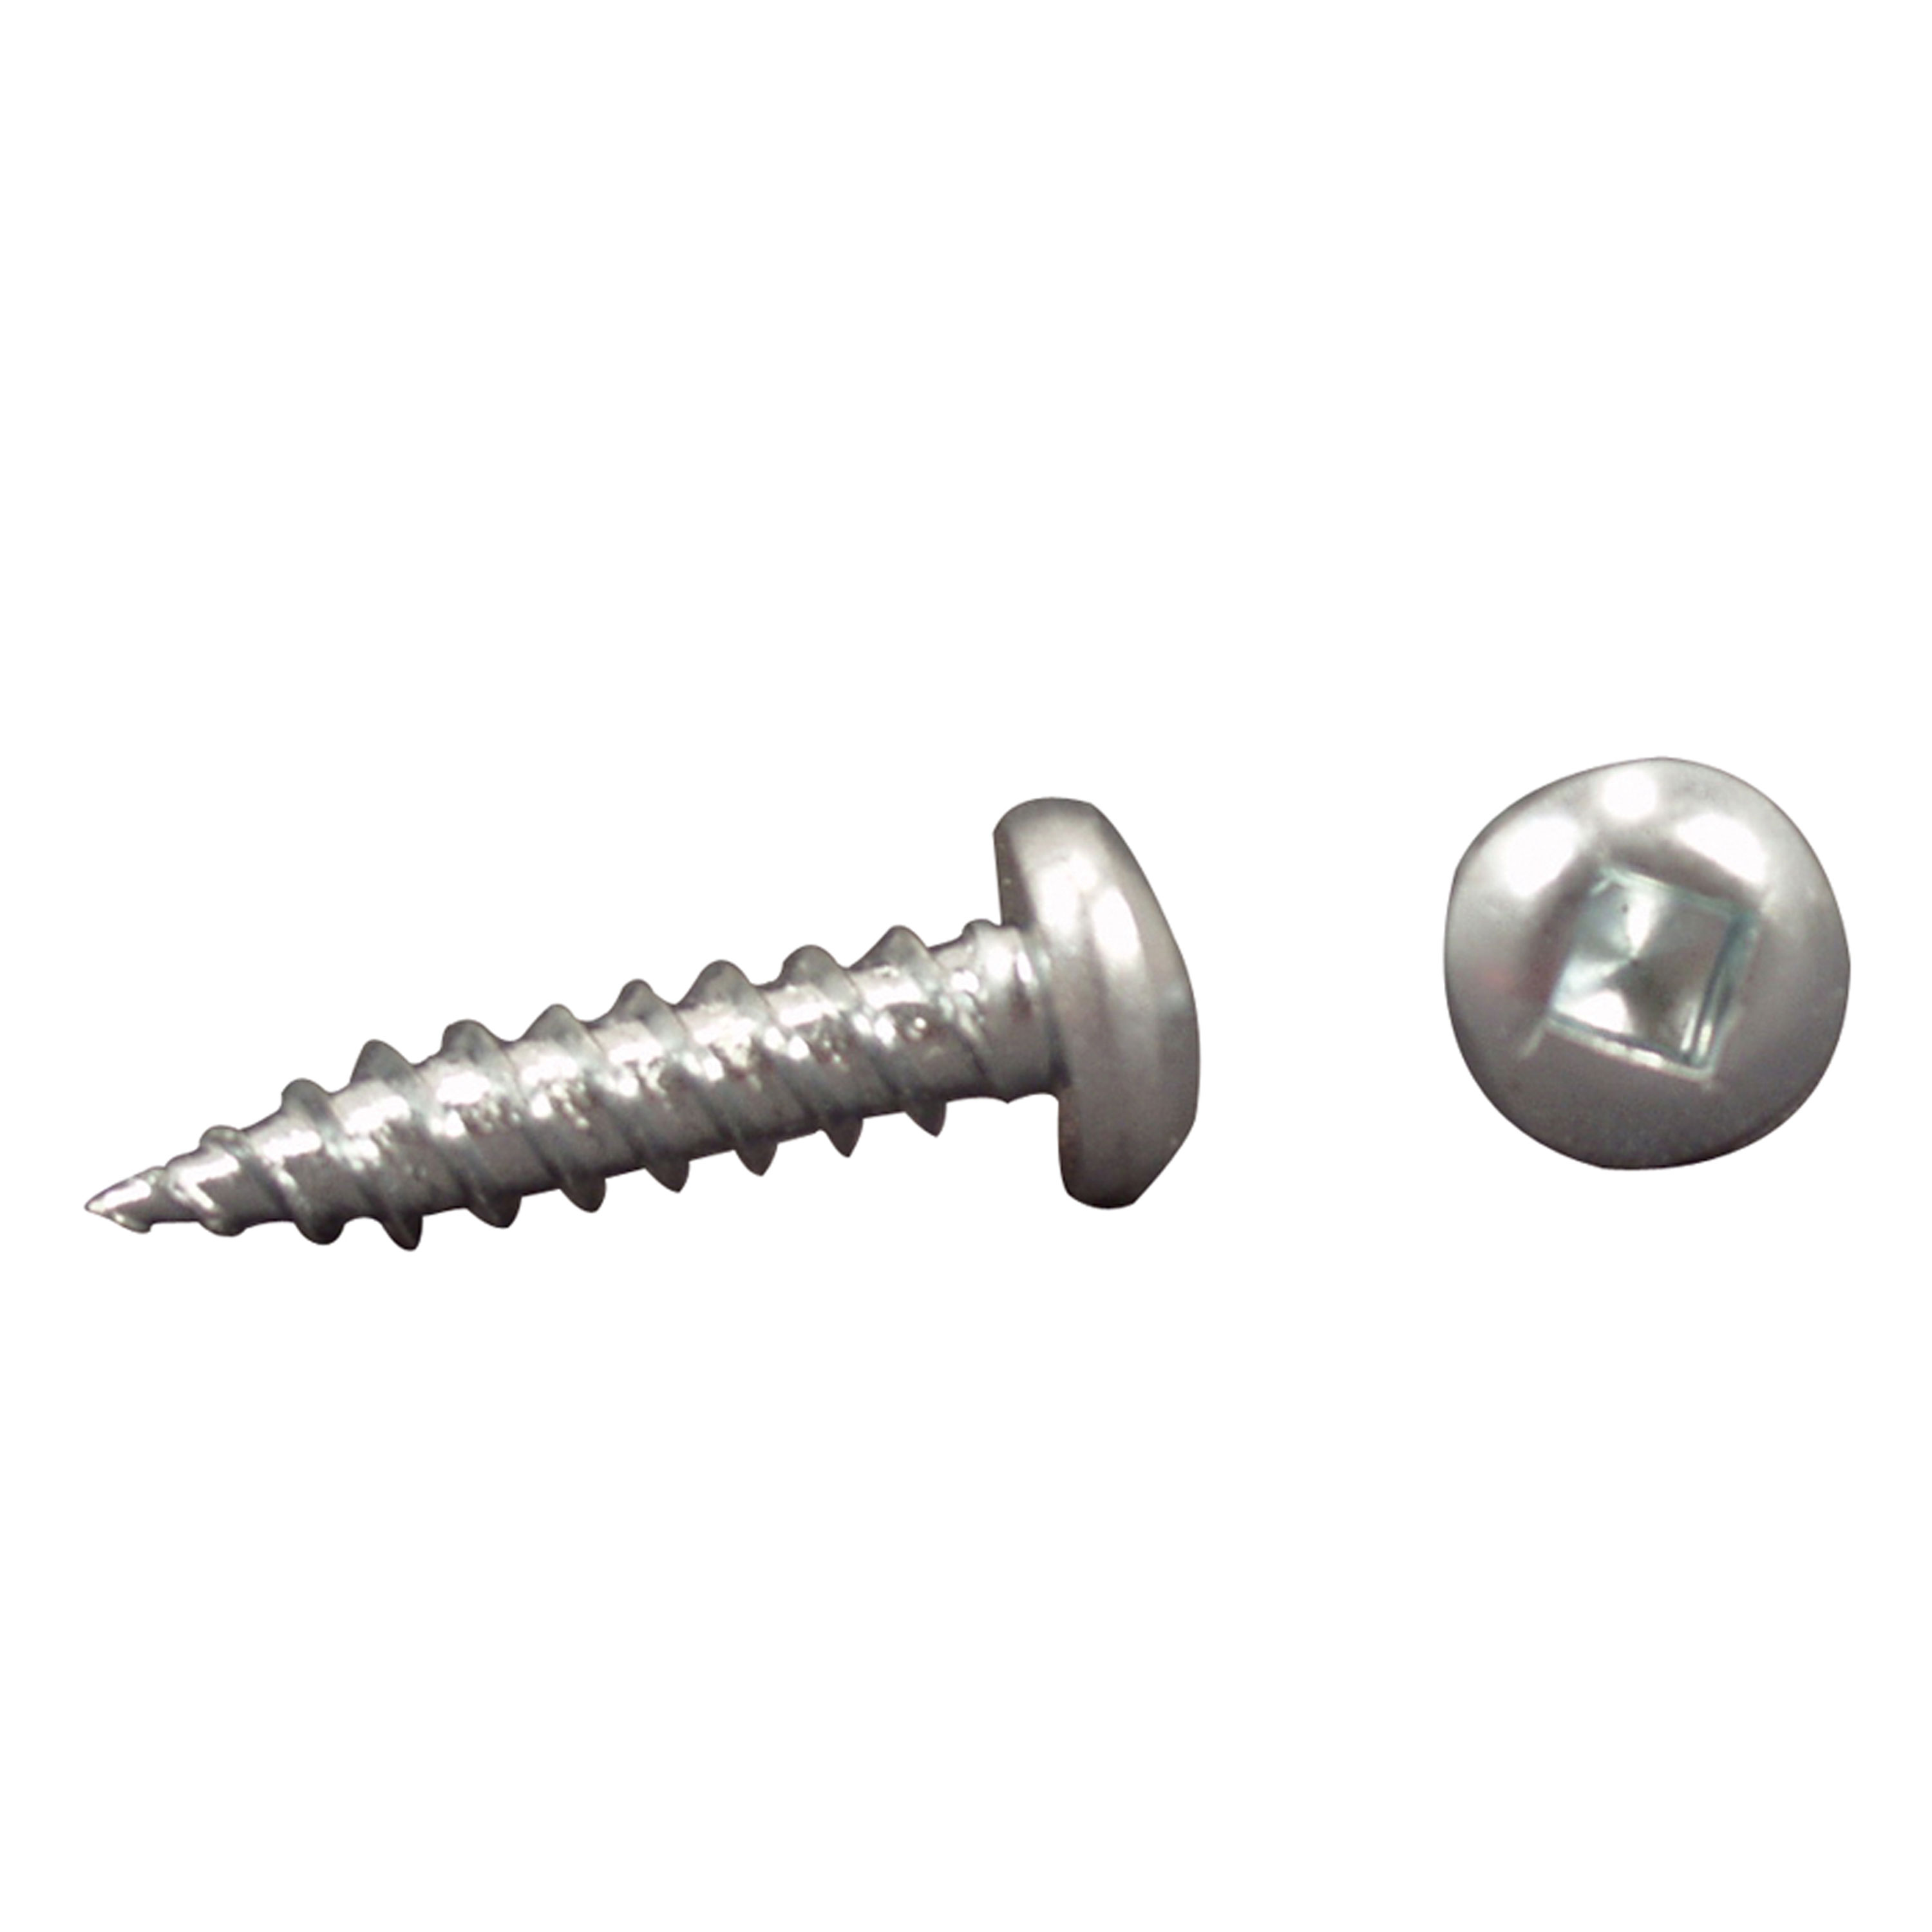 AP Products 012-PSQ500 8 X 1-1/4 Pan Head Square Recess Screw, Pack of 500 - 1-1/4", Zinc - image 1 of 3